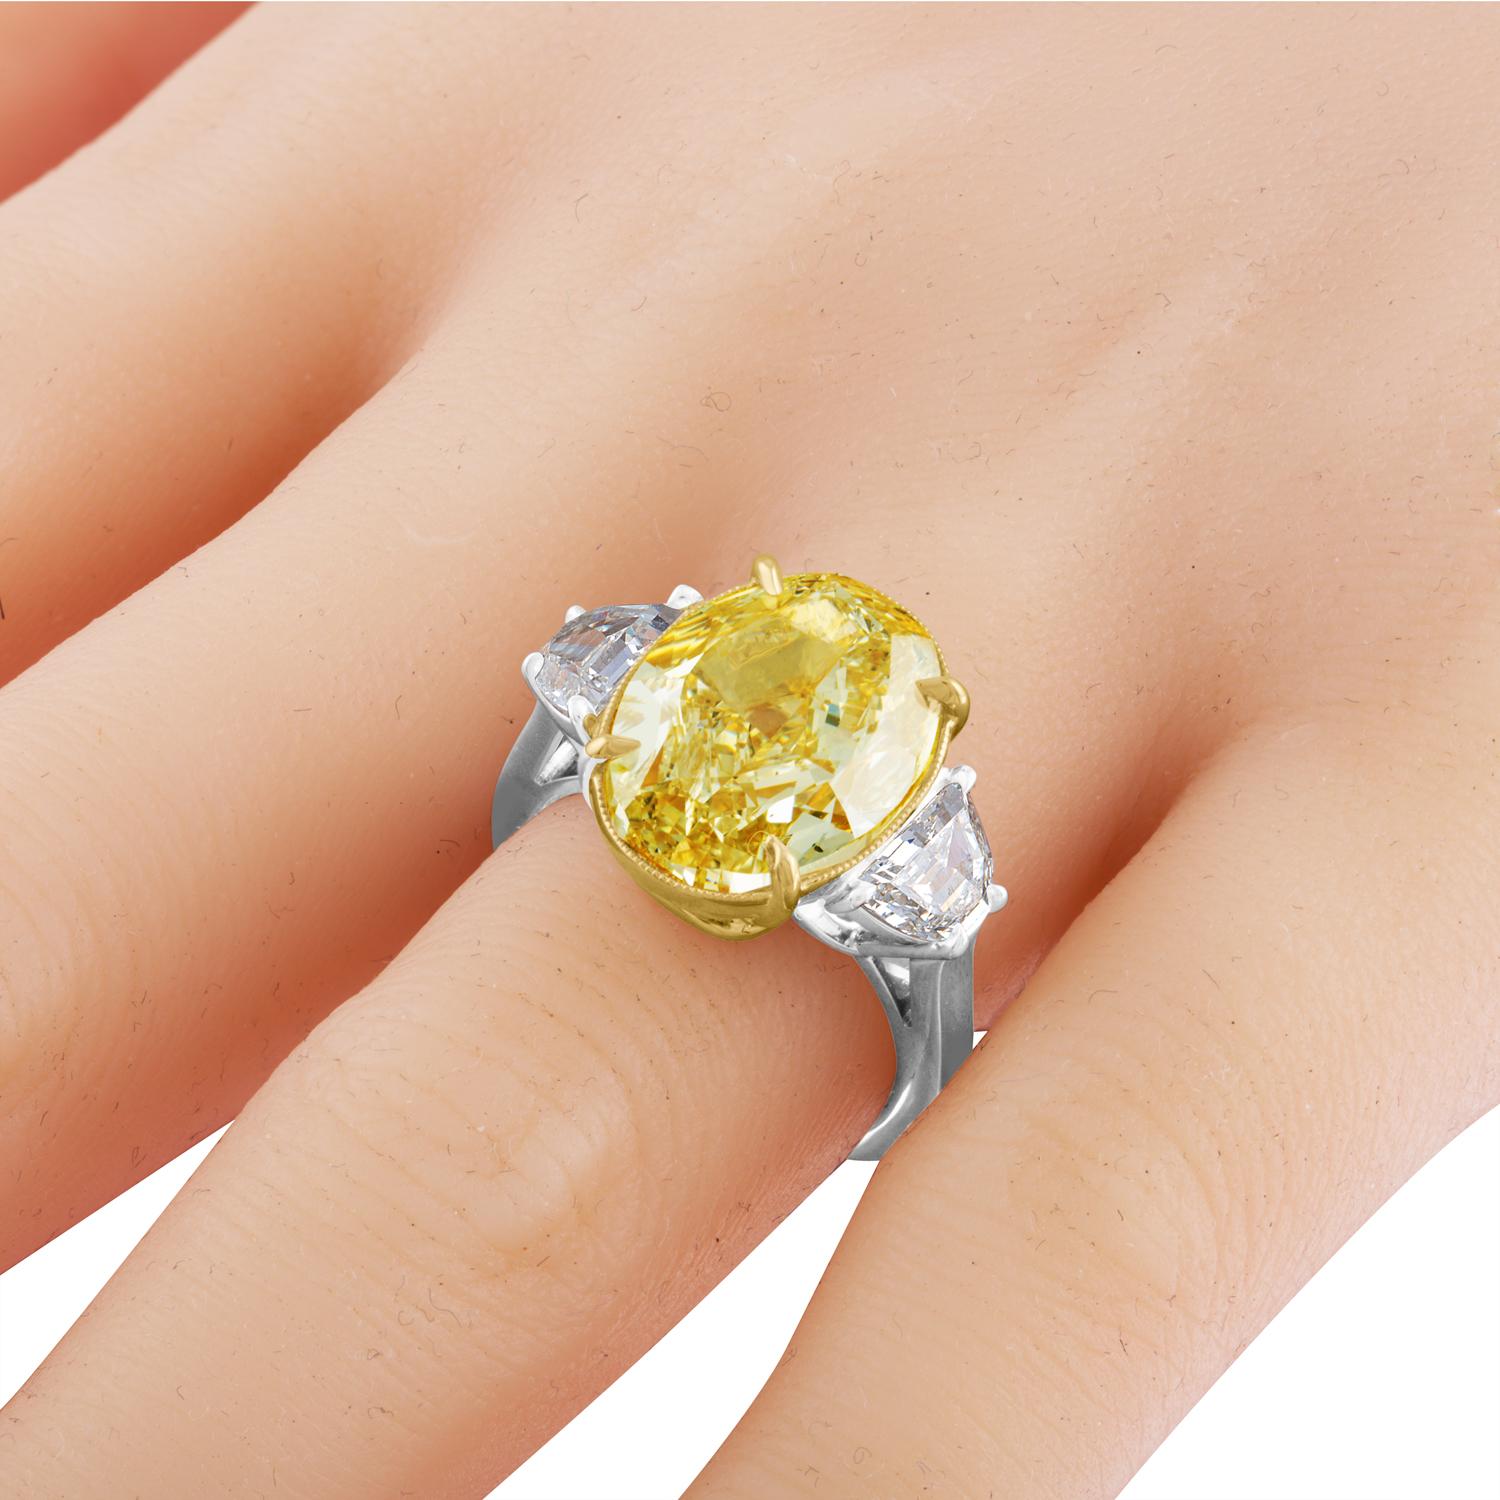 This is a very complimenting Oval Diamond Ring. A 10.01 Carat Oval Diamond, GIA Certified Fancy Brownish Yellow in Color and SI1 in Clarity. Certificate number 1142488391.
The Brilliant Diamond is set in Two Tone Mounting, the Center Diamond is set